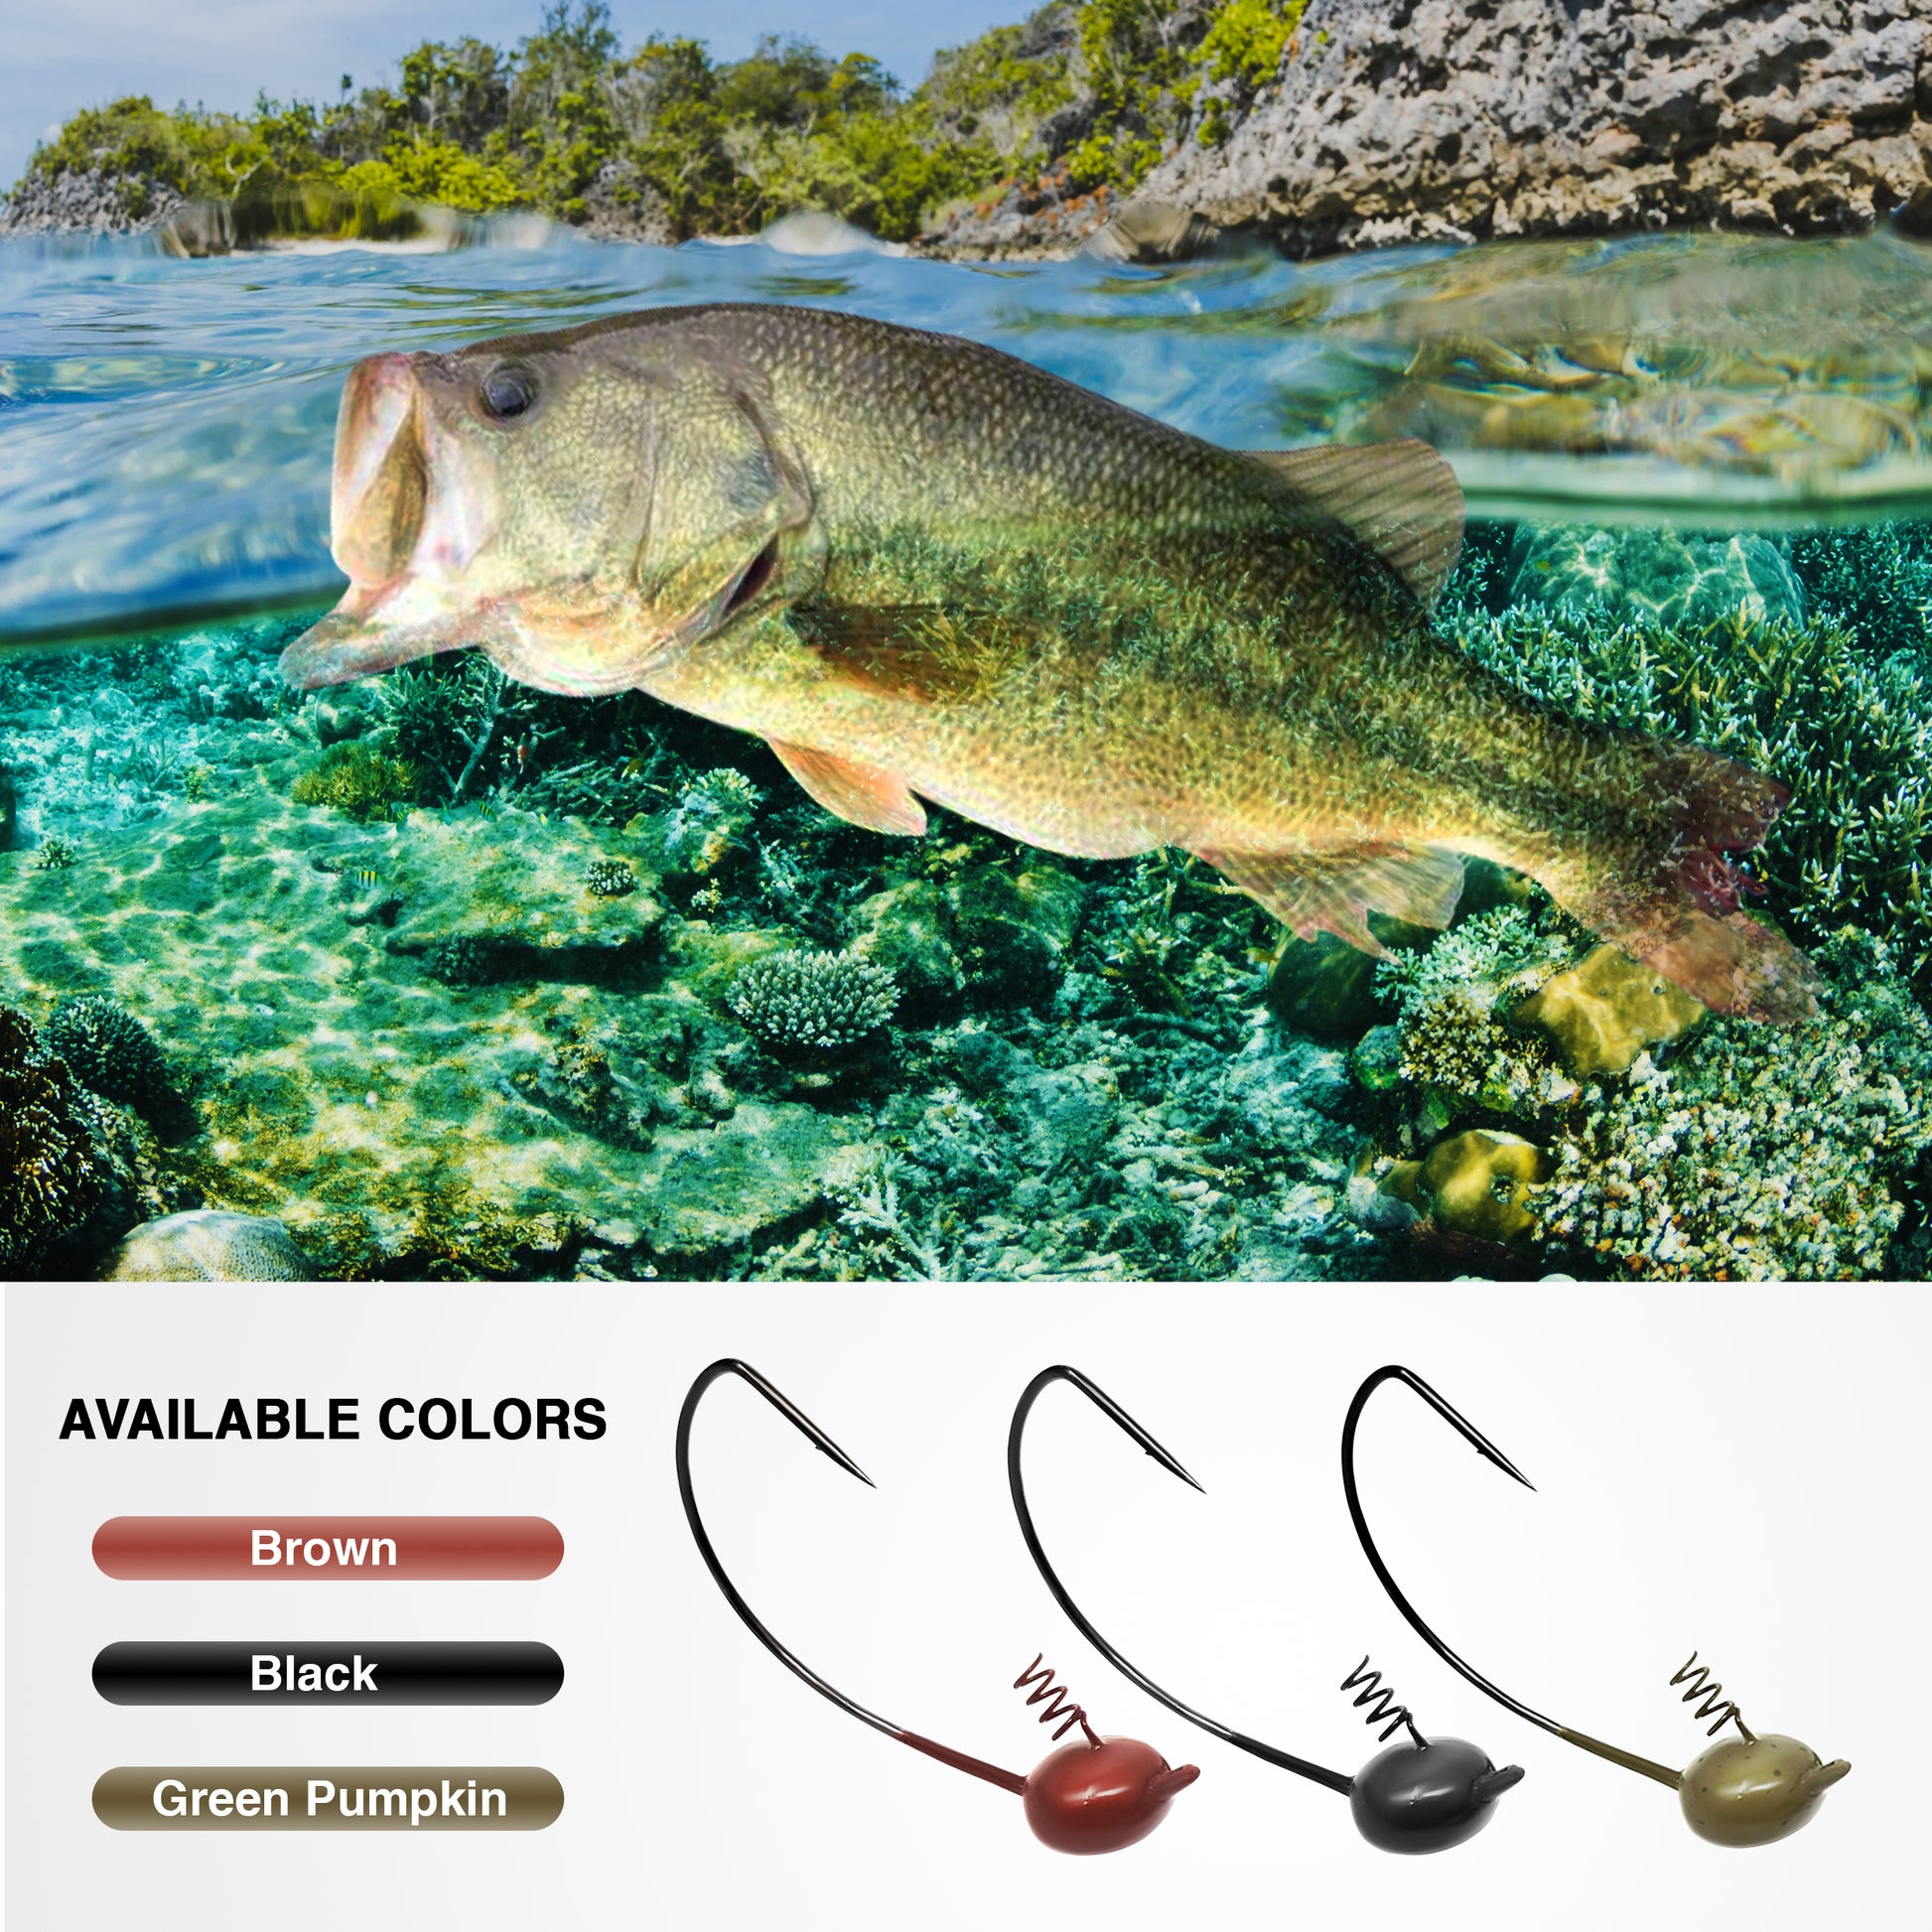 Wholesale tungsten shaky jig heads to Improve Your Fishing